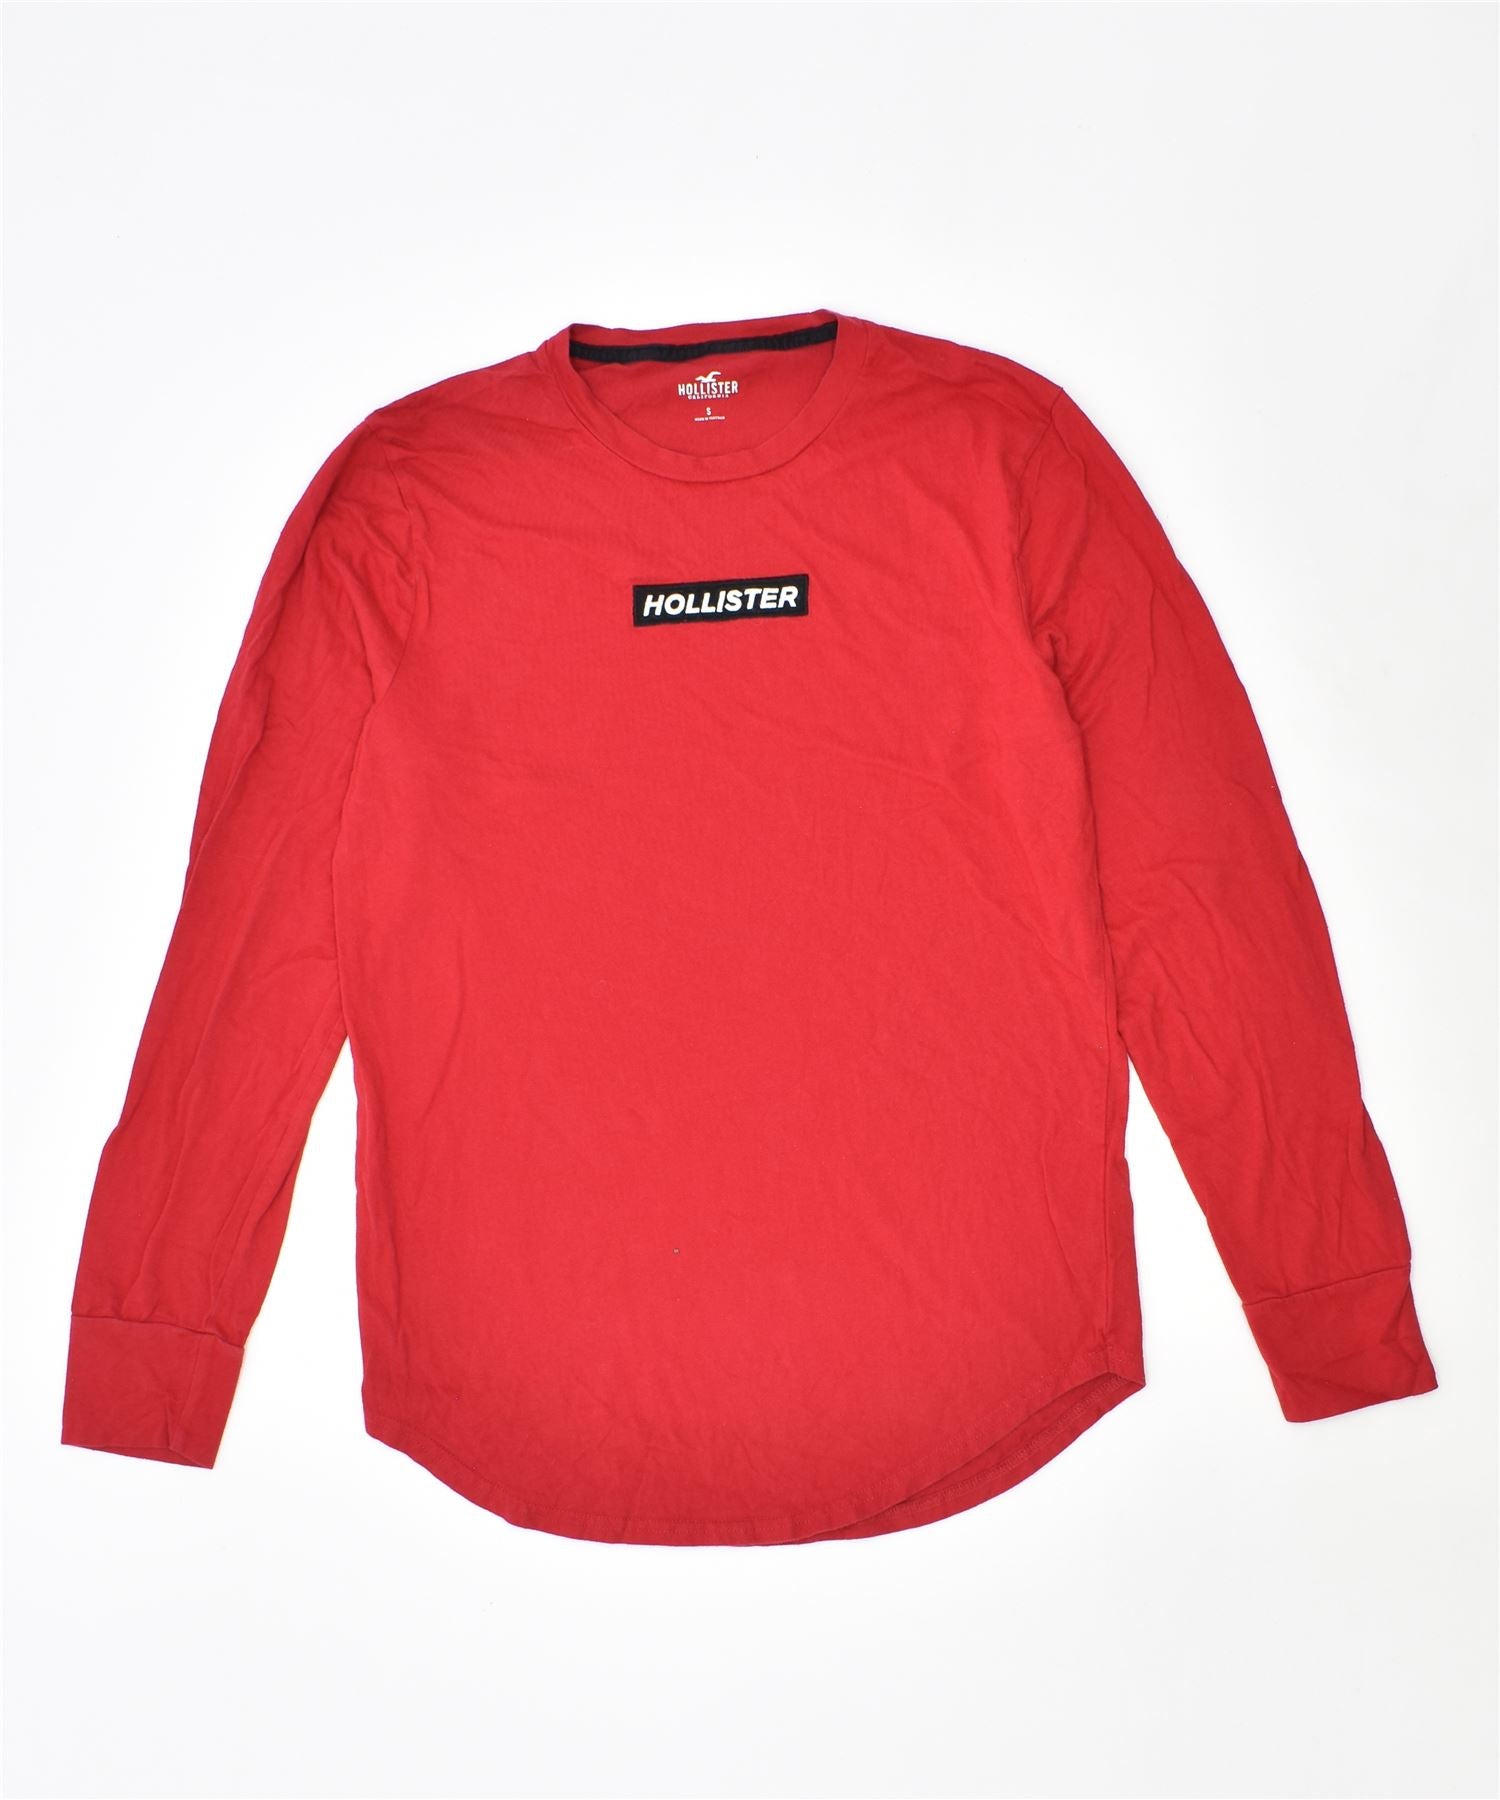 HOLLISTER Mens Graphic Top Long Sleeve Small Red Cotton